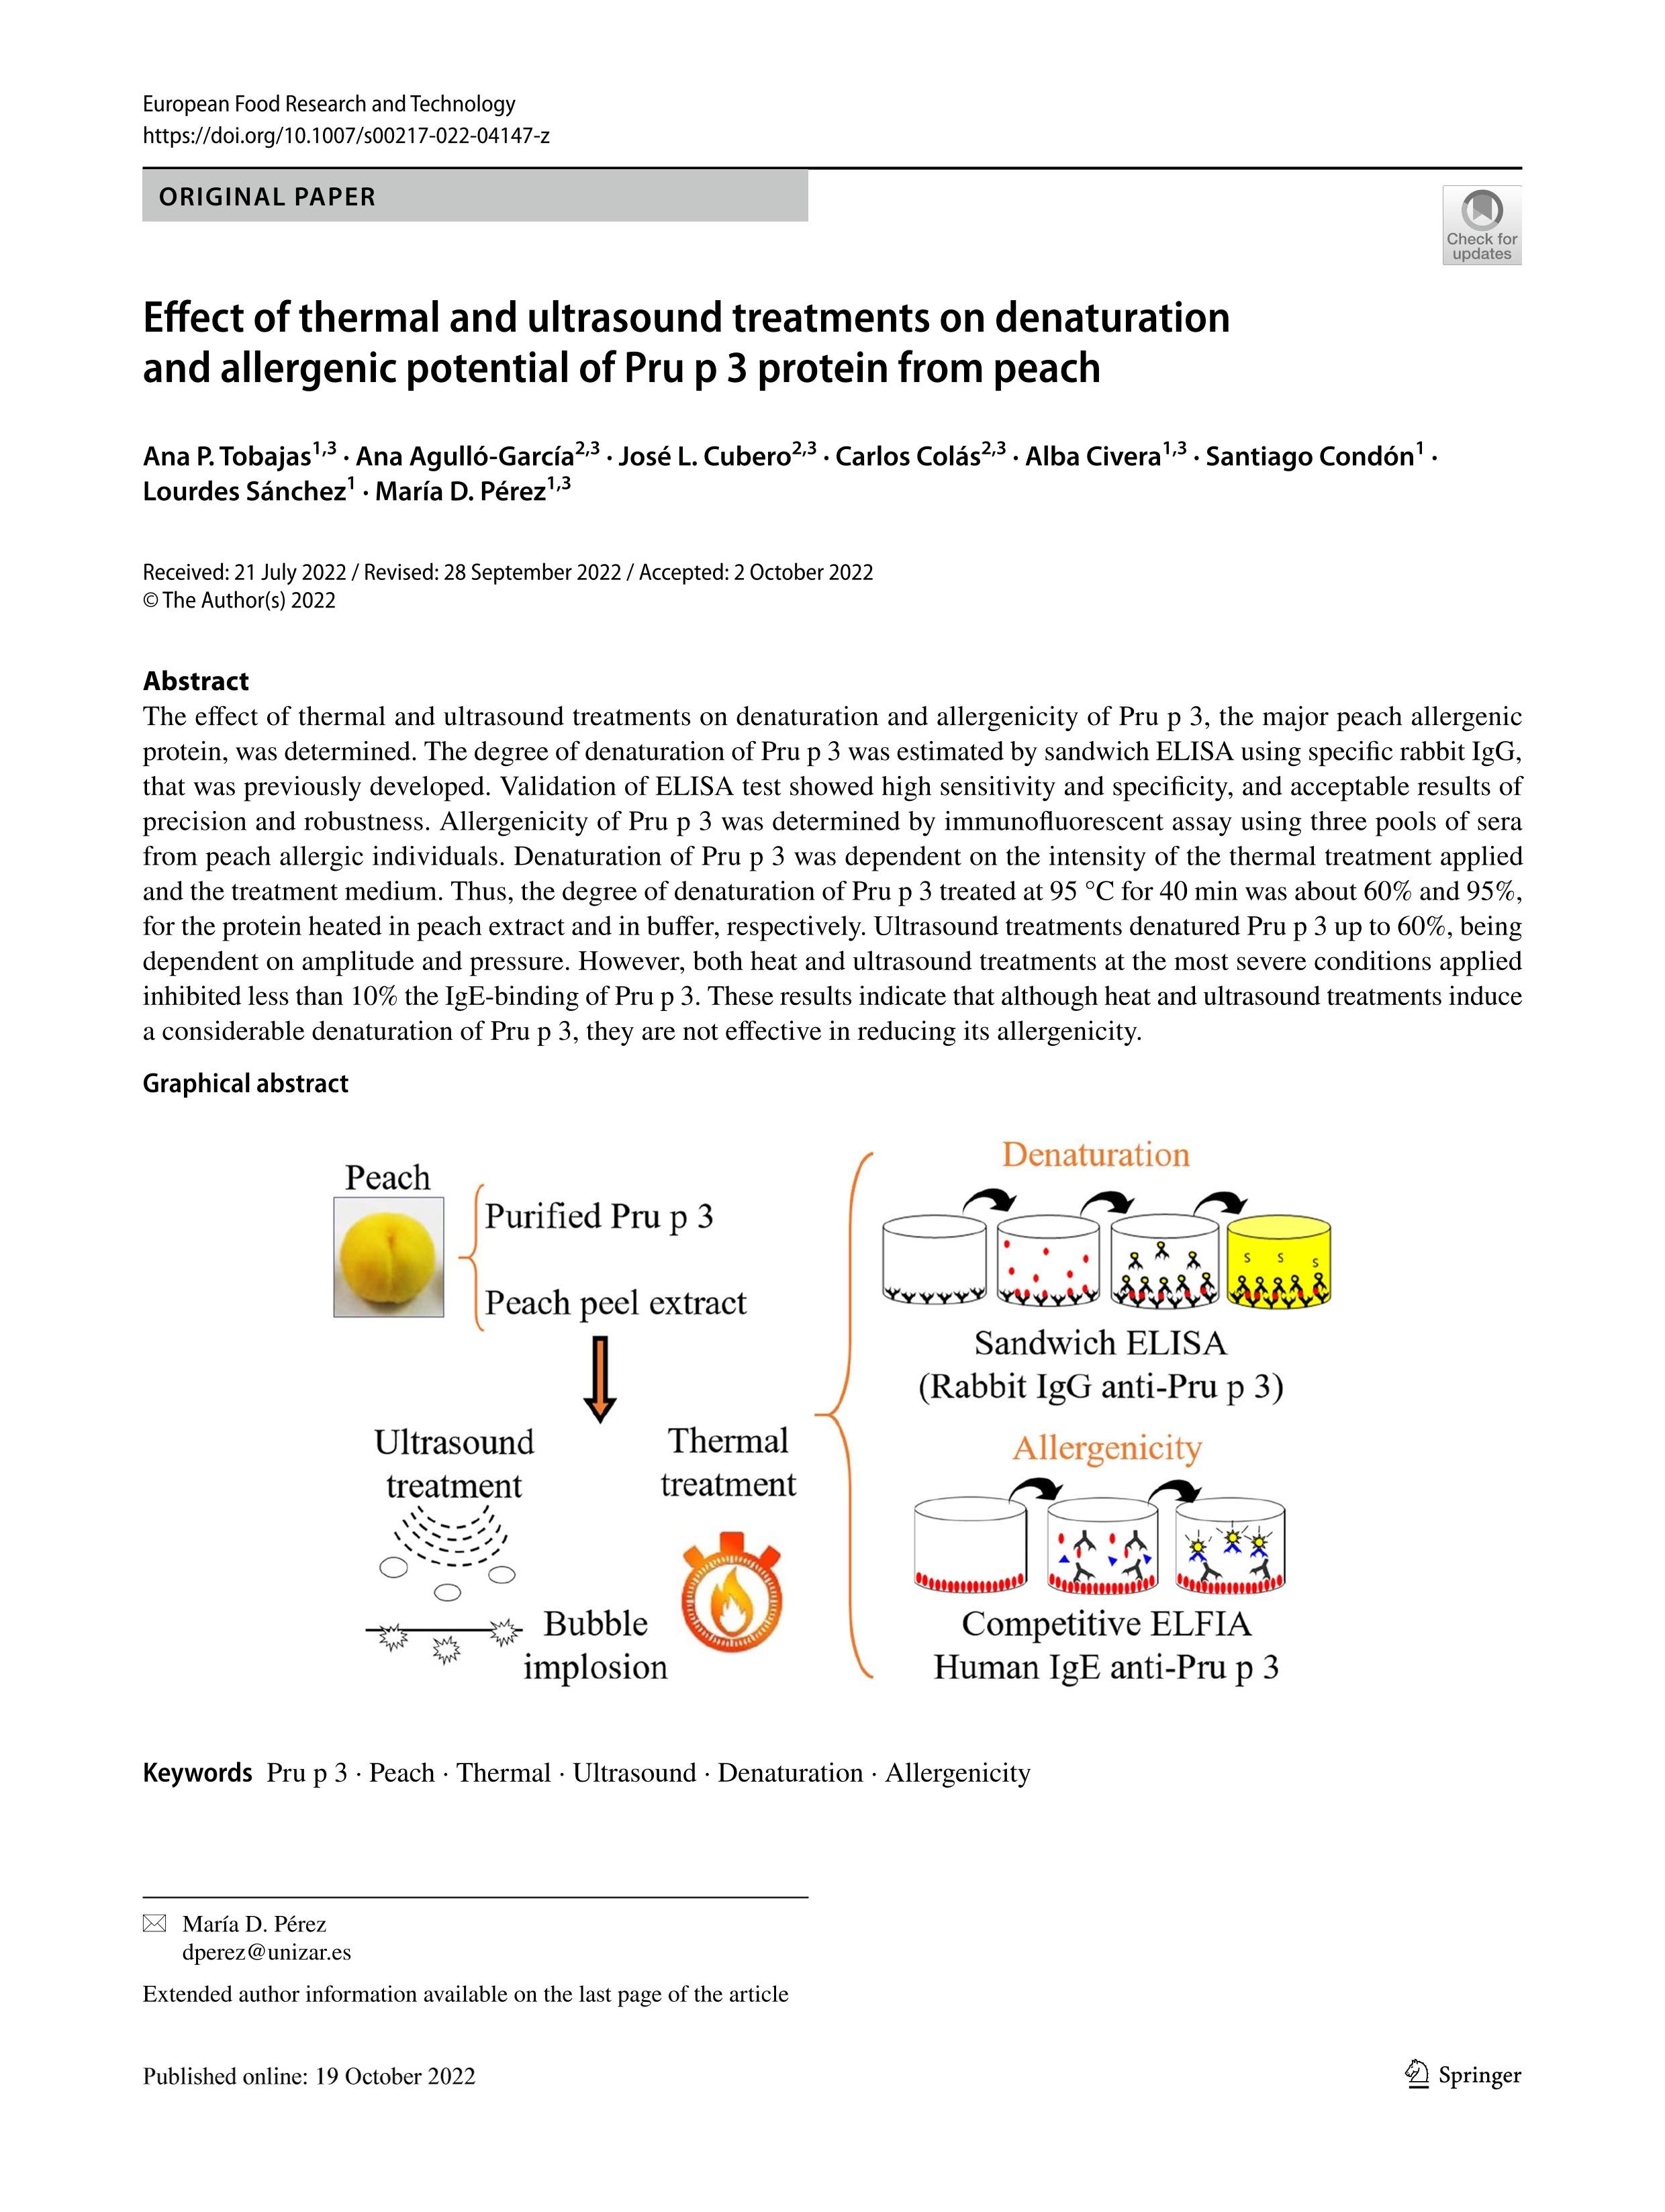 Effect of thermal and ultrasound treatments on denaturation and allergenic potential of Pru p 3 protein from peach